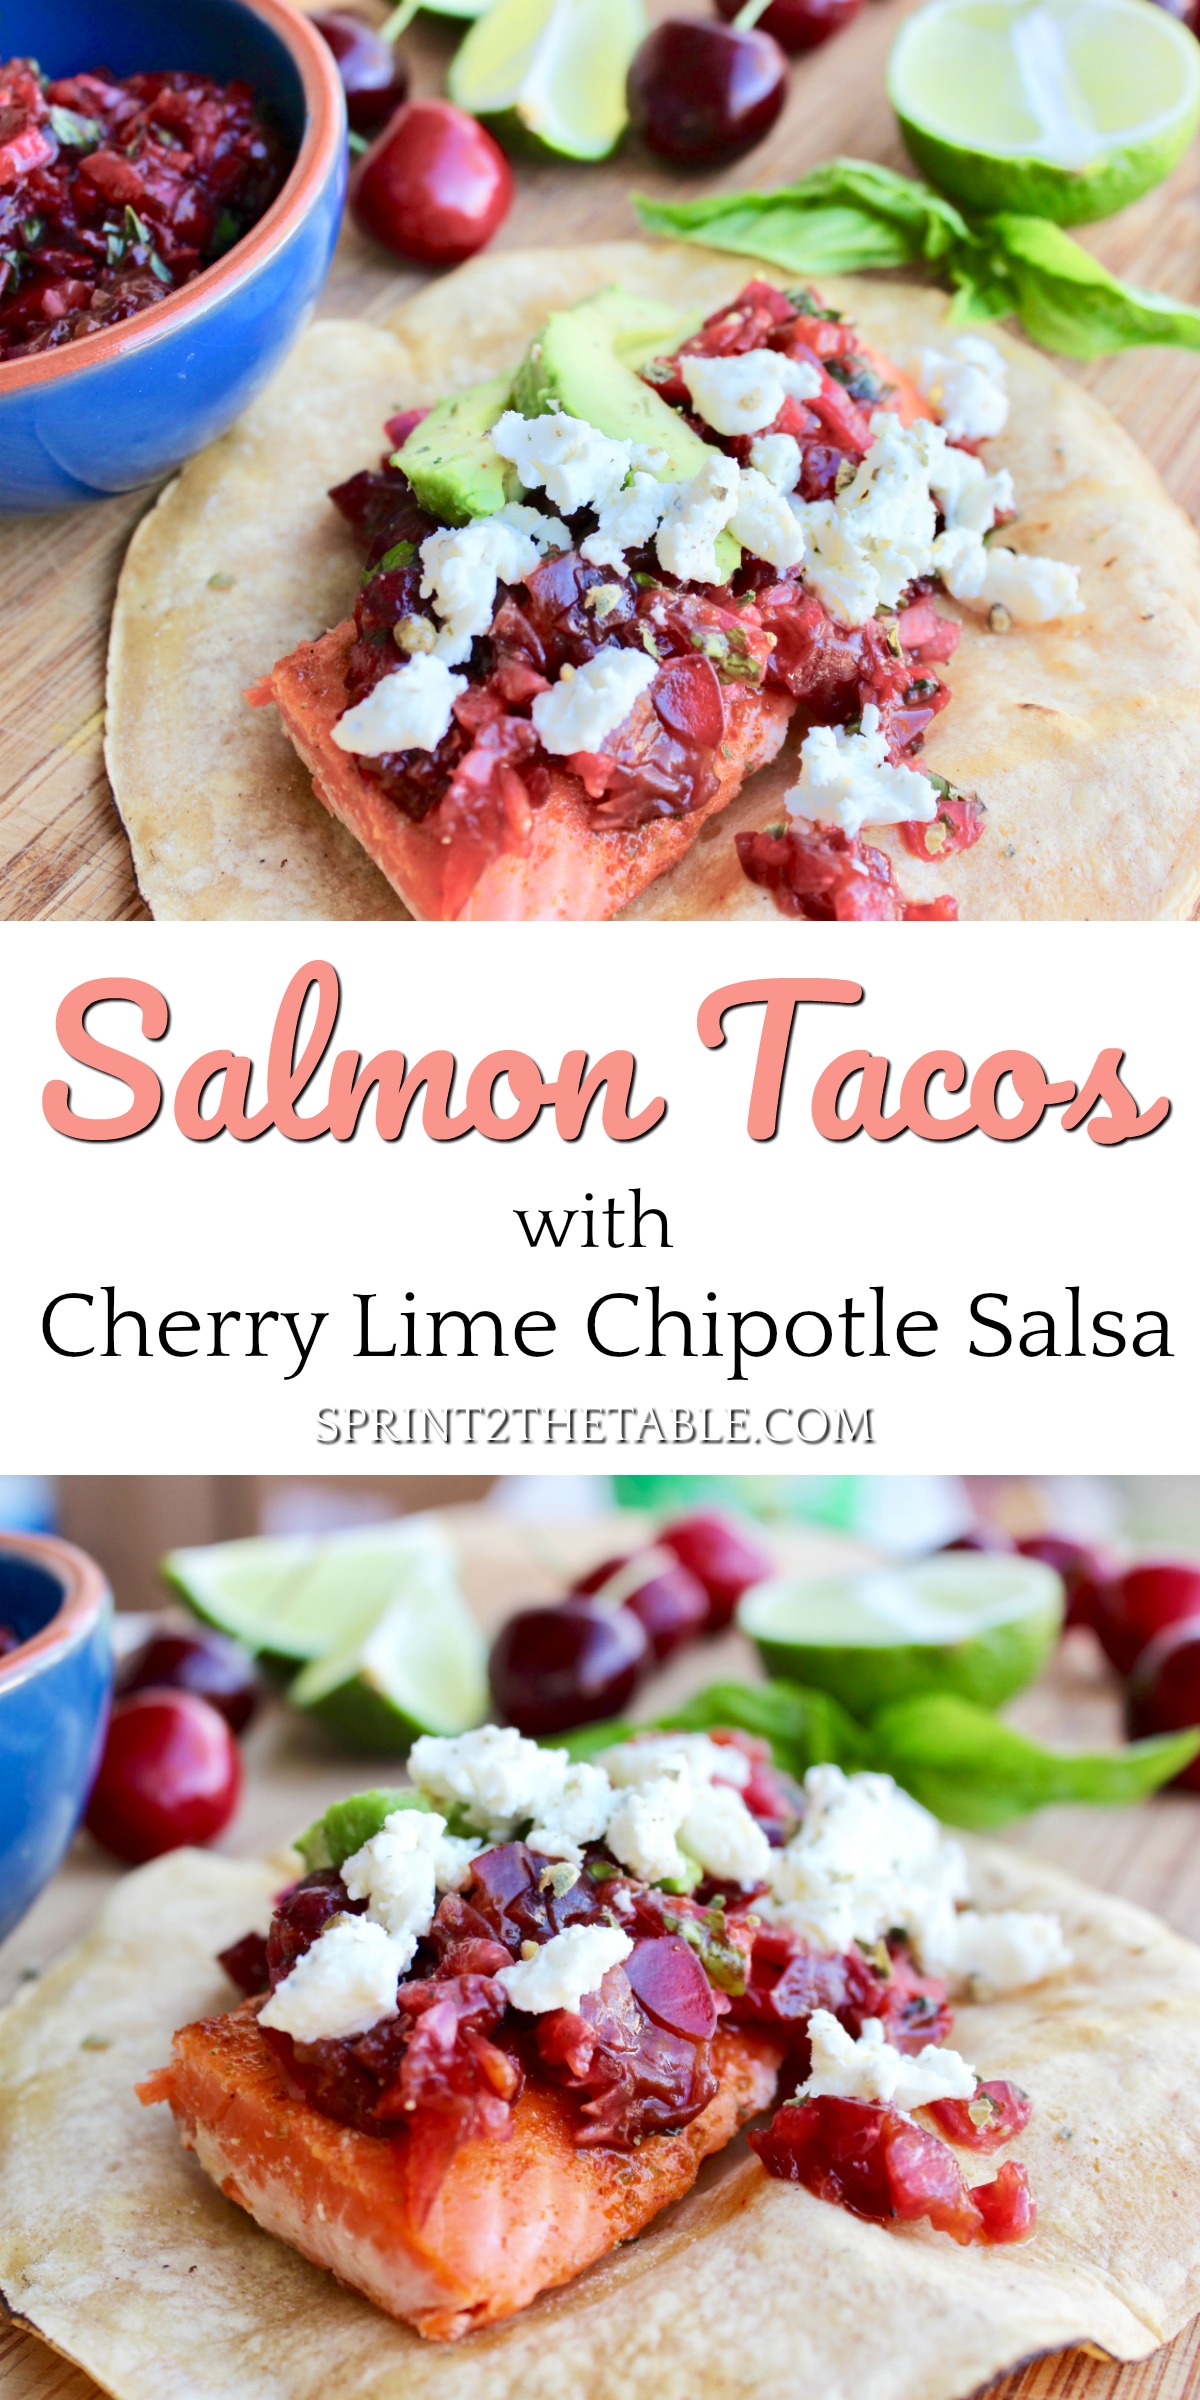 Salmon Tacos with Cherry Lime Chipotle Salsa | Sprint 2 the Table